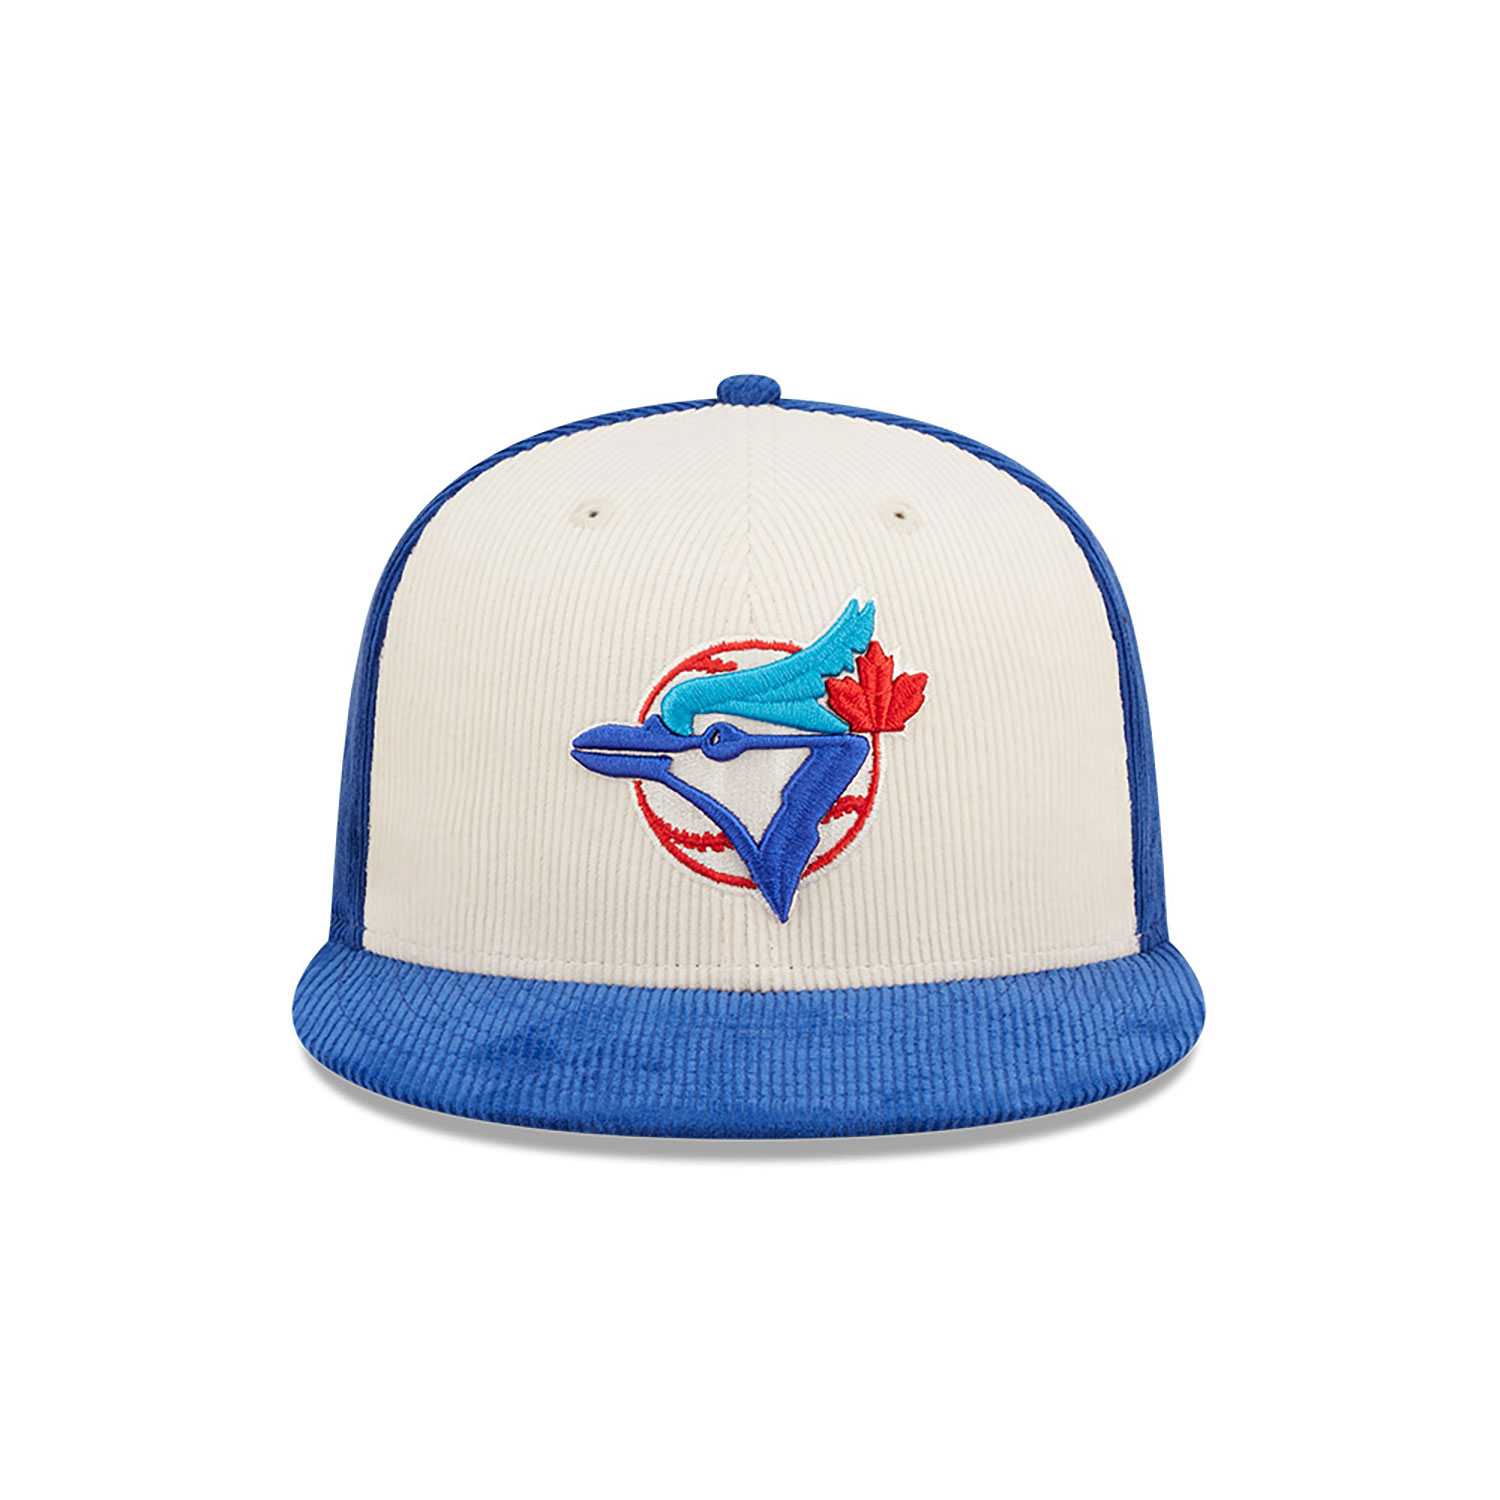 Official New Era Toronto Blue Jays MLB Cooperstown Blue 59FIFTY Fitted Cap  B7975_292 B7975_292